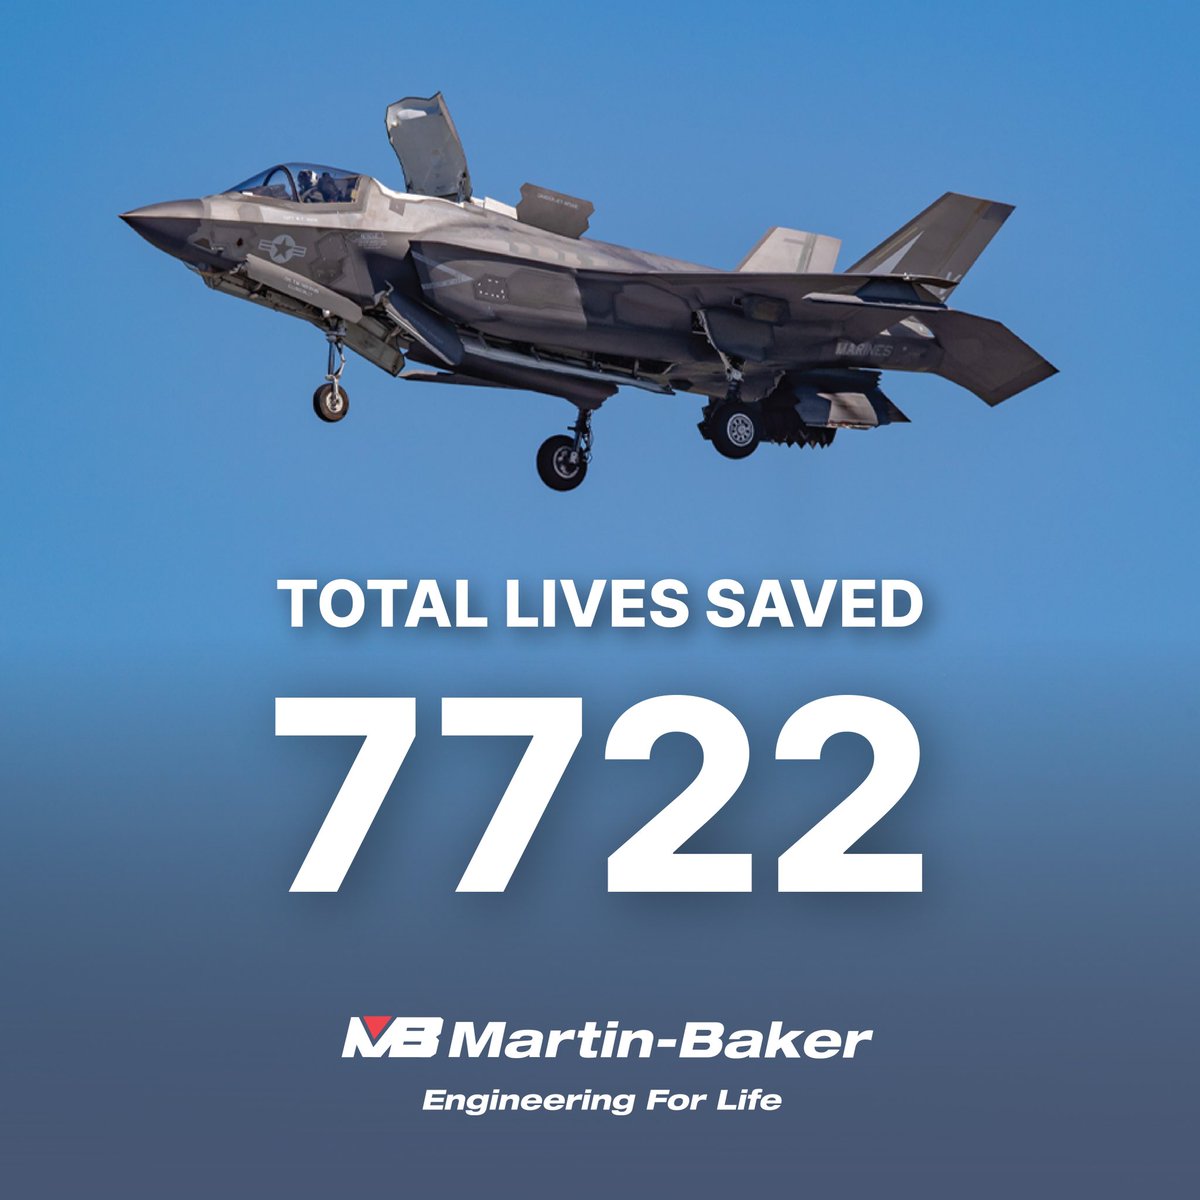 On Tuesday 28th May, an F-35B crashed shortly after take-off from Kirtland Air Force Base, Albuquerque. The pilot successfully ejected using the Martin-Baker US16E Seat. This is the 9th life saved by the US16E seat to date. #MartinBaker #EngineeringForLife